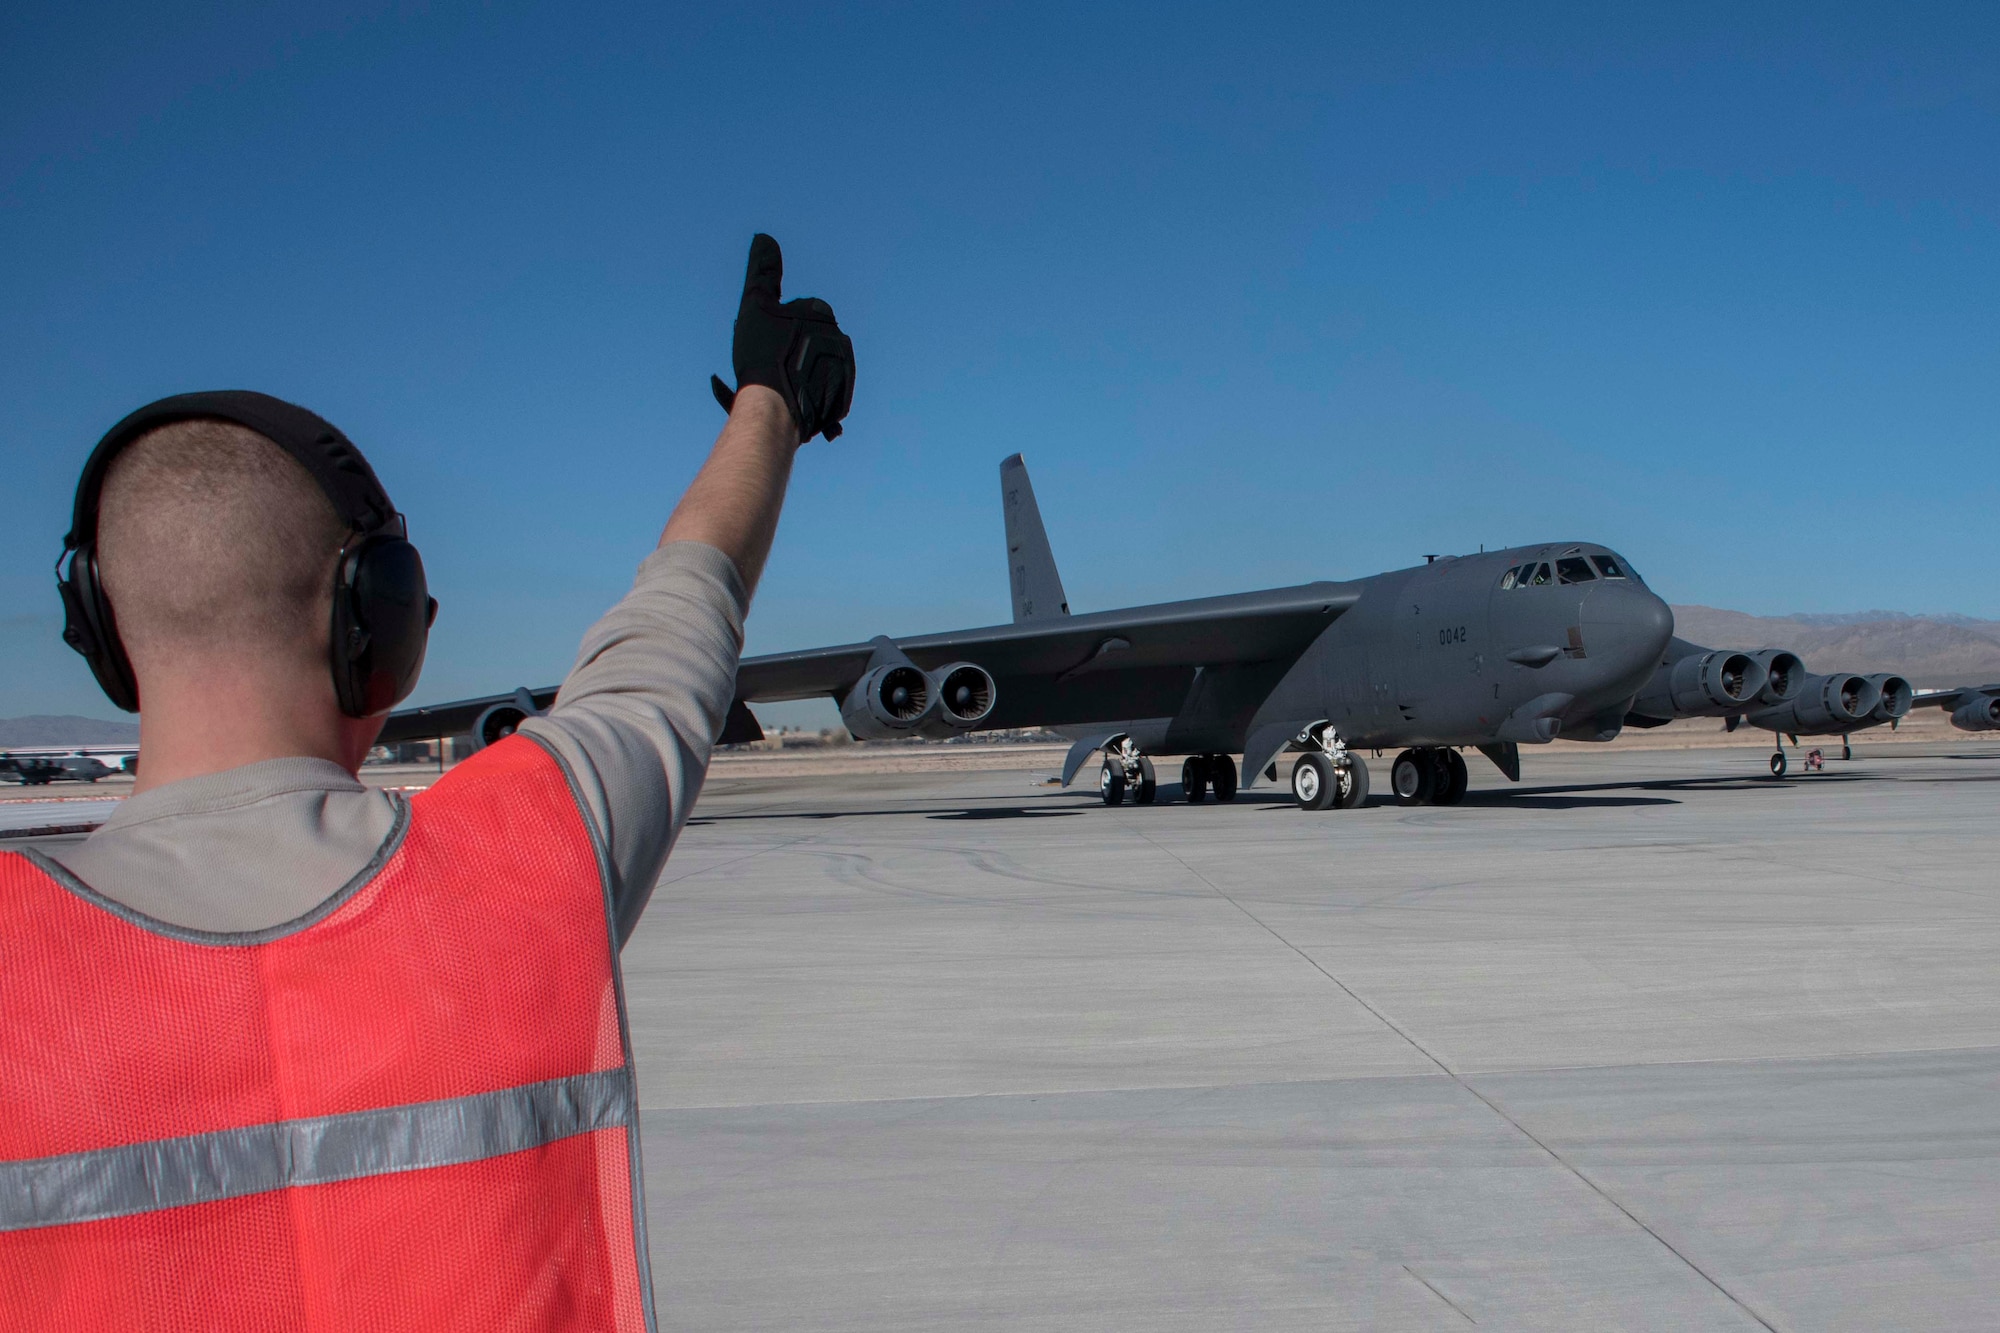 U.S. Air Force Senior Airman Alexander Horrocks, 11th Aircraft Maintenance Unit crew chief, gives a thumbs up to a departing B-52 Stratofortress at Nellis Air Force Base, Nevada, Dec. 11, 2018.  As part of the total force integration model, Horrocks, an active-duty Airman, served alongside Reserve Citizen Airmen maintainers from Barksdale Air Force Base, Louisiana to support the biannual Weapons School Integration exercise.  The Airmen work alongside one another both at Barksdale AFB and in forward locations.  The TFI leverages the continuity and knowledge base of the Air Force Reserve to serve as a force multiplier. (U.S. Air Force photo by Master Sgt. Ted Daigle)